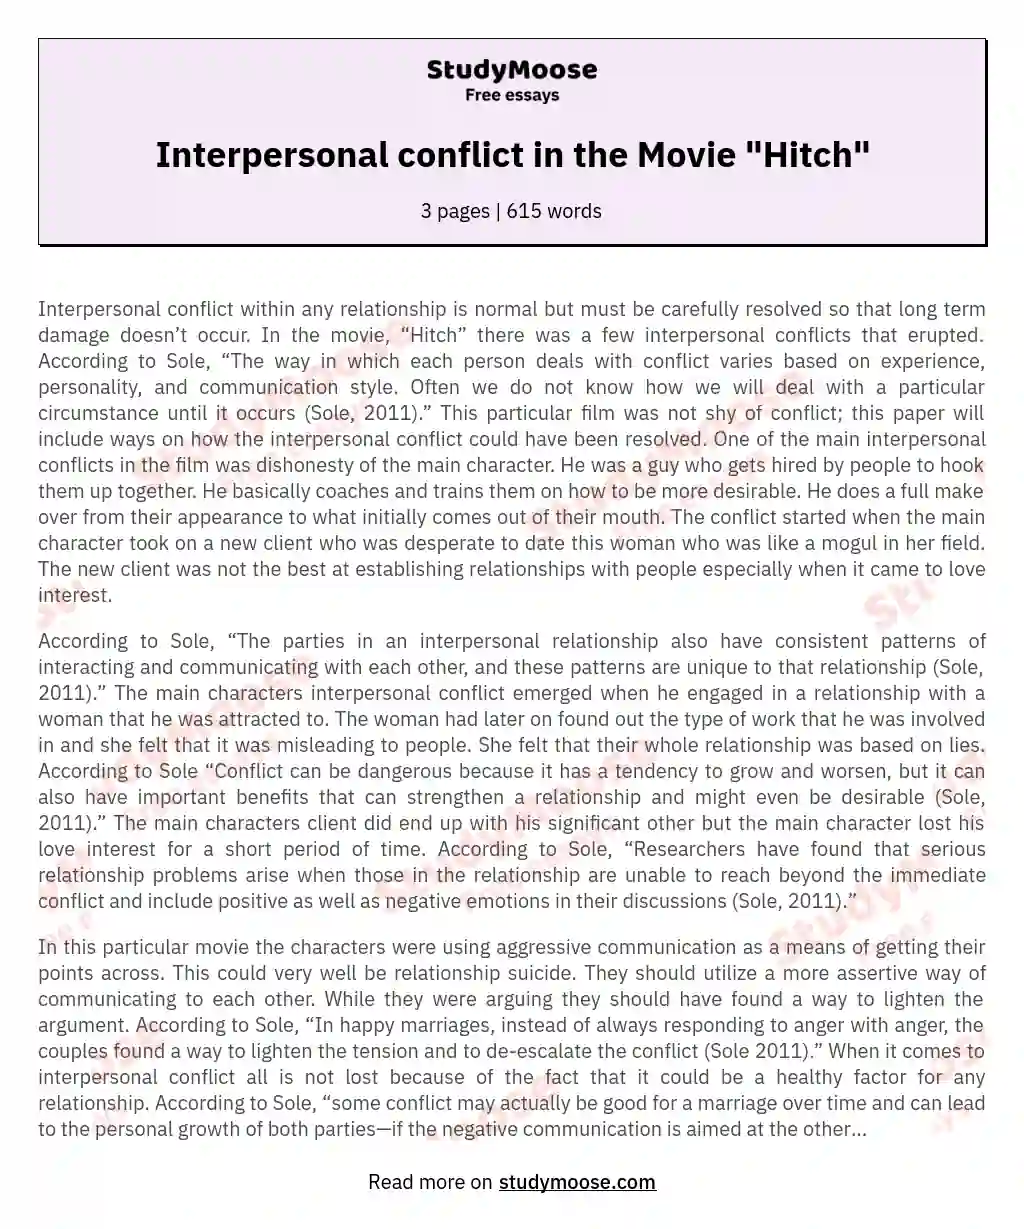 Interpersonal conflict in the Movie "Hitch"